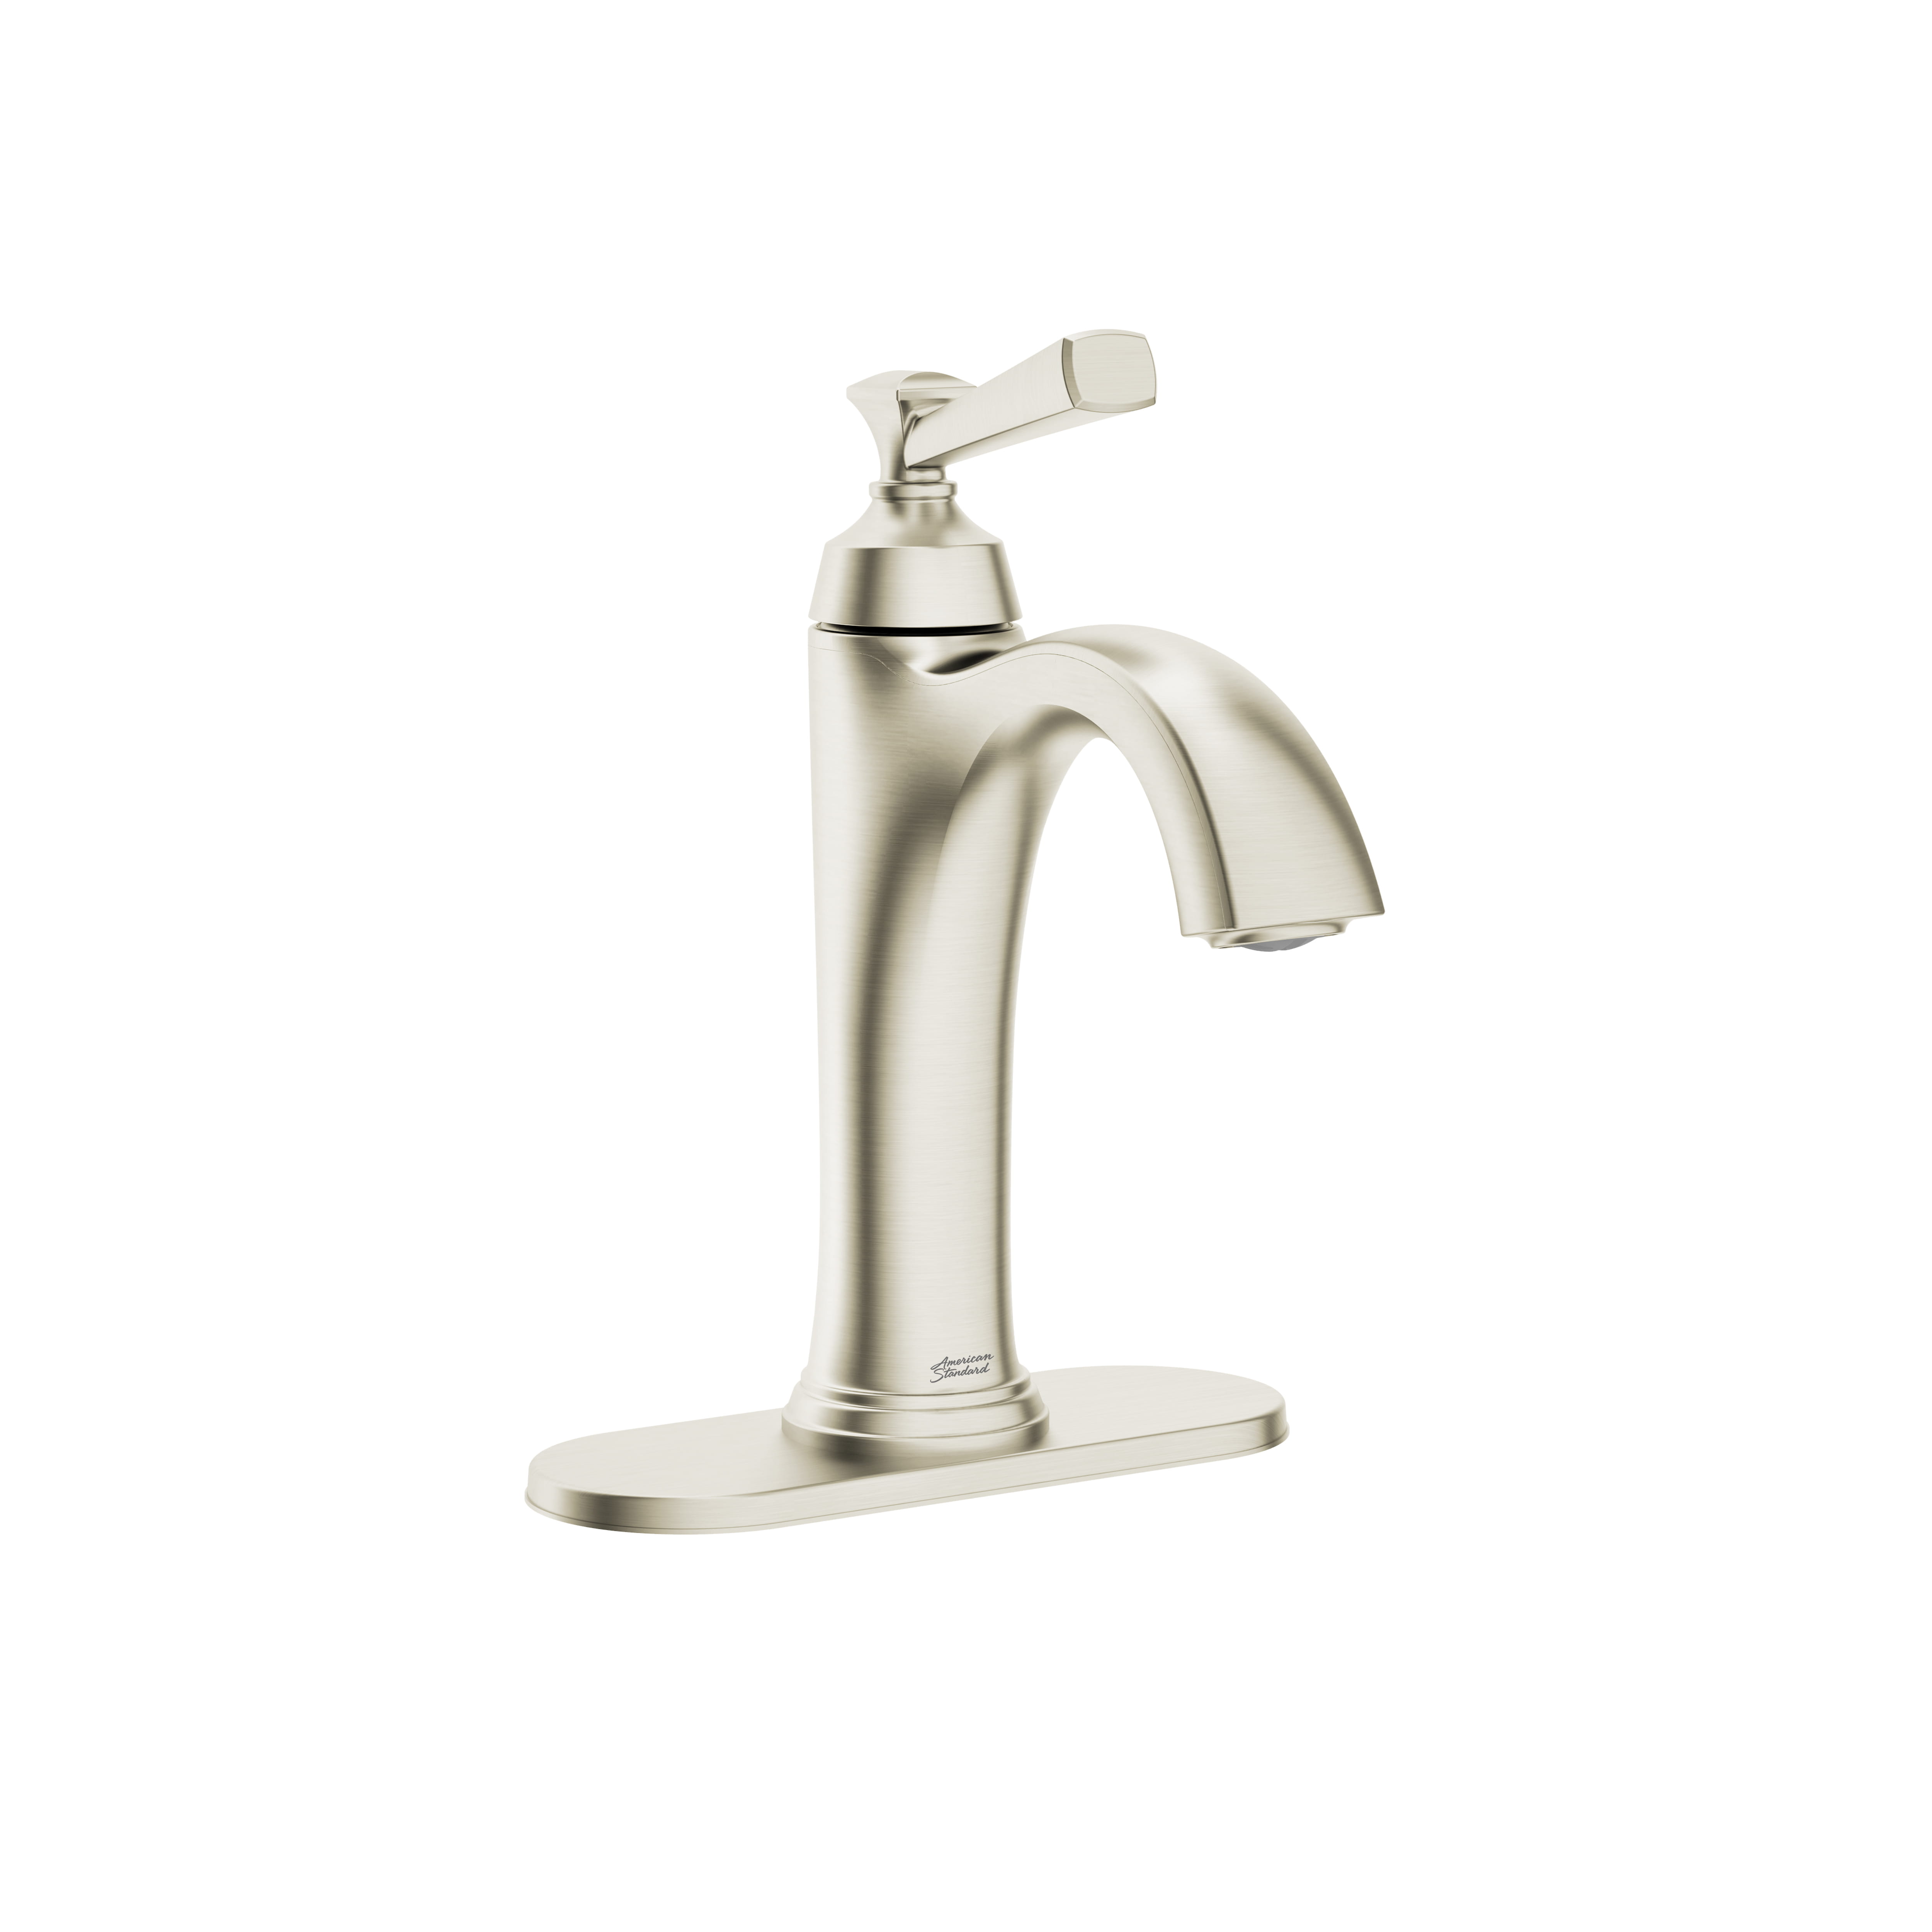 Rumson Single Hole Single Handle Bathroom Faucet 12 GPM with Lever Handle   BRUSHED NICKEL